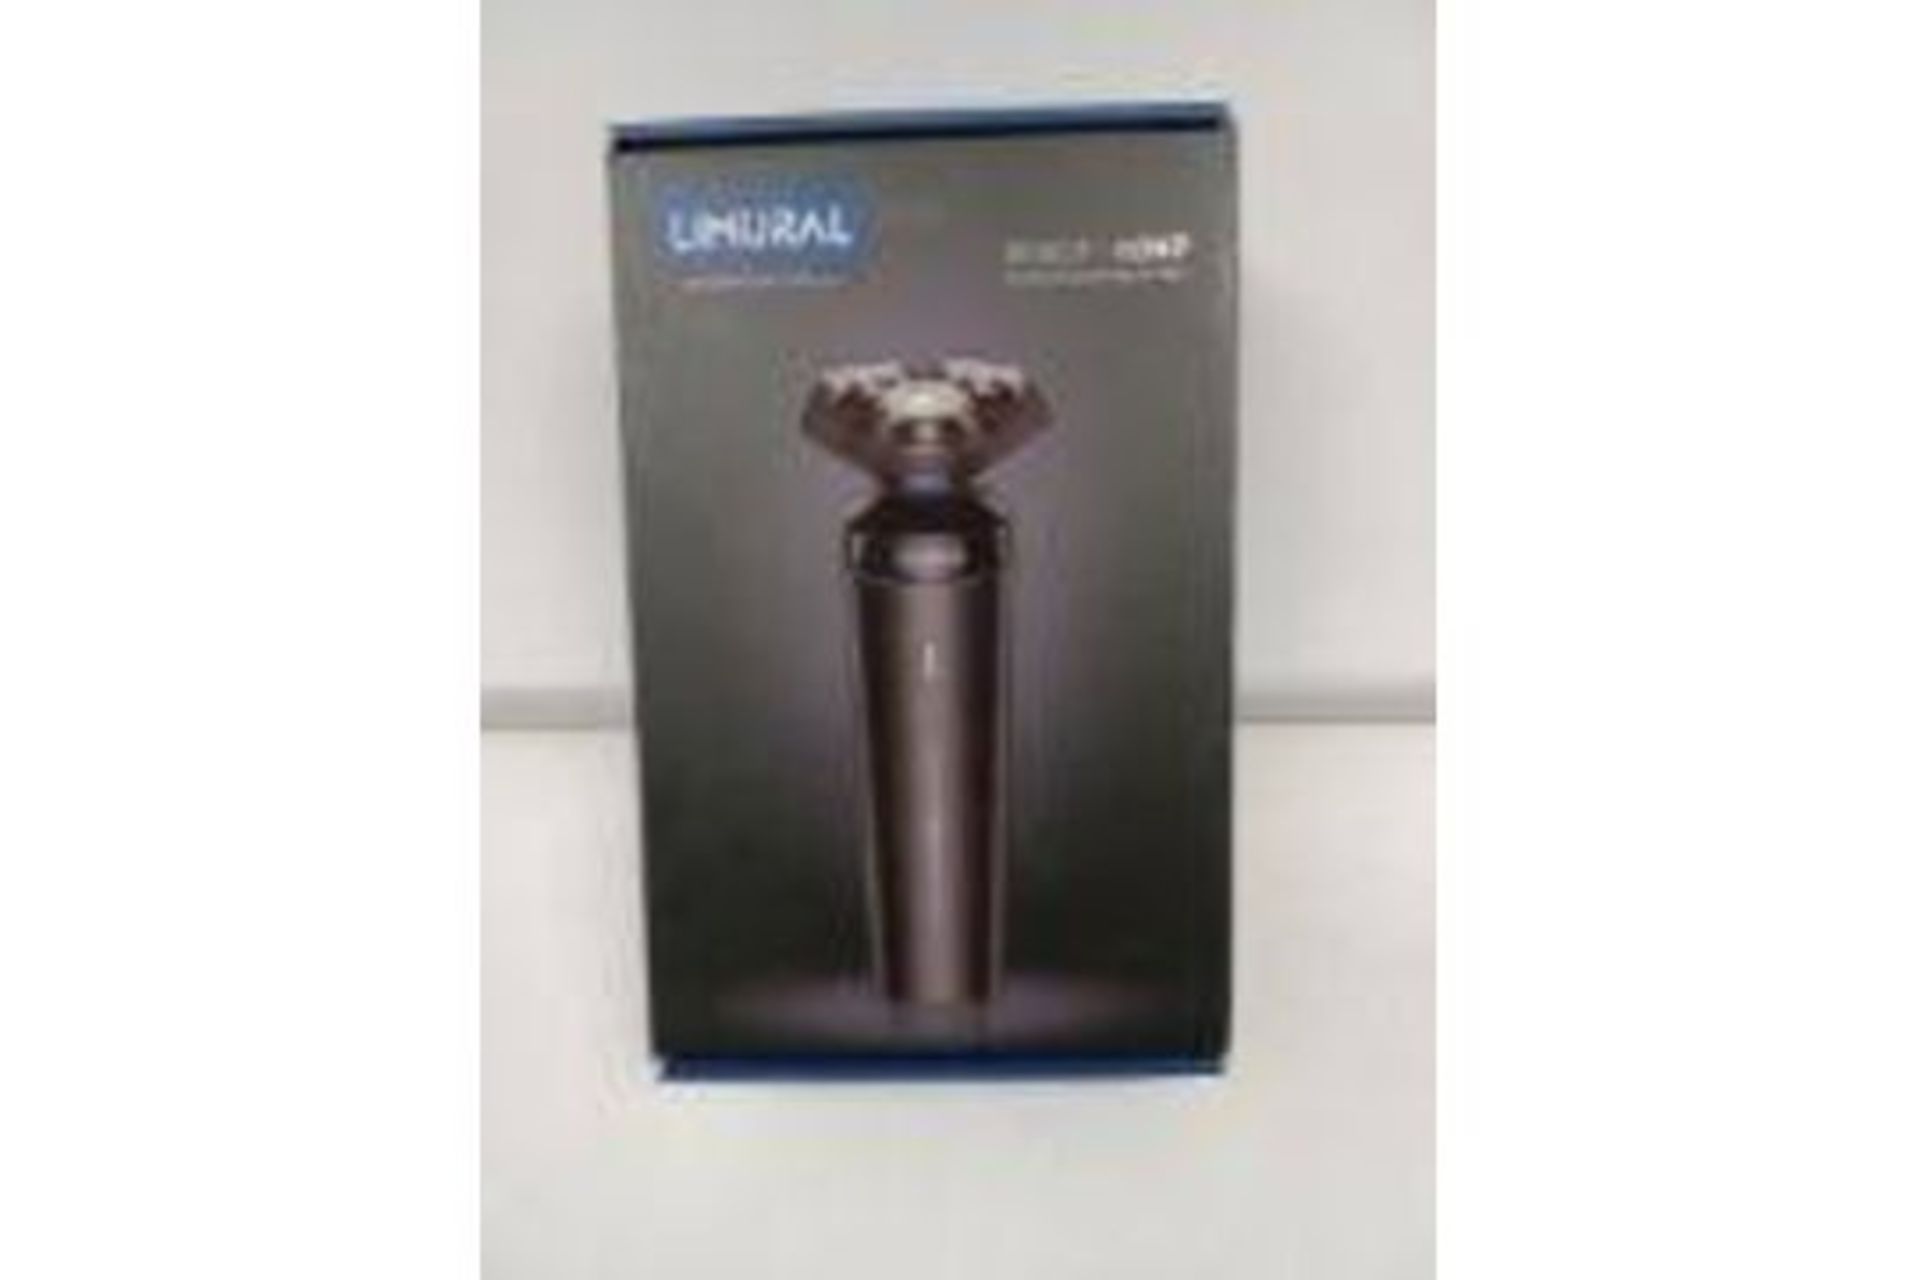 2 X NEW BOXED Limural PRO Electric Shavers for Men - 8317 (OFC) ?EXTRA ONE BLADE SET?The electric